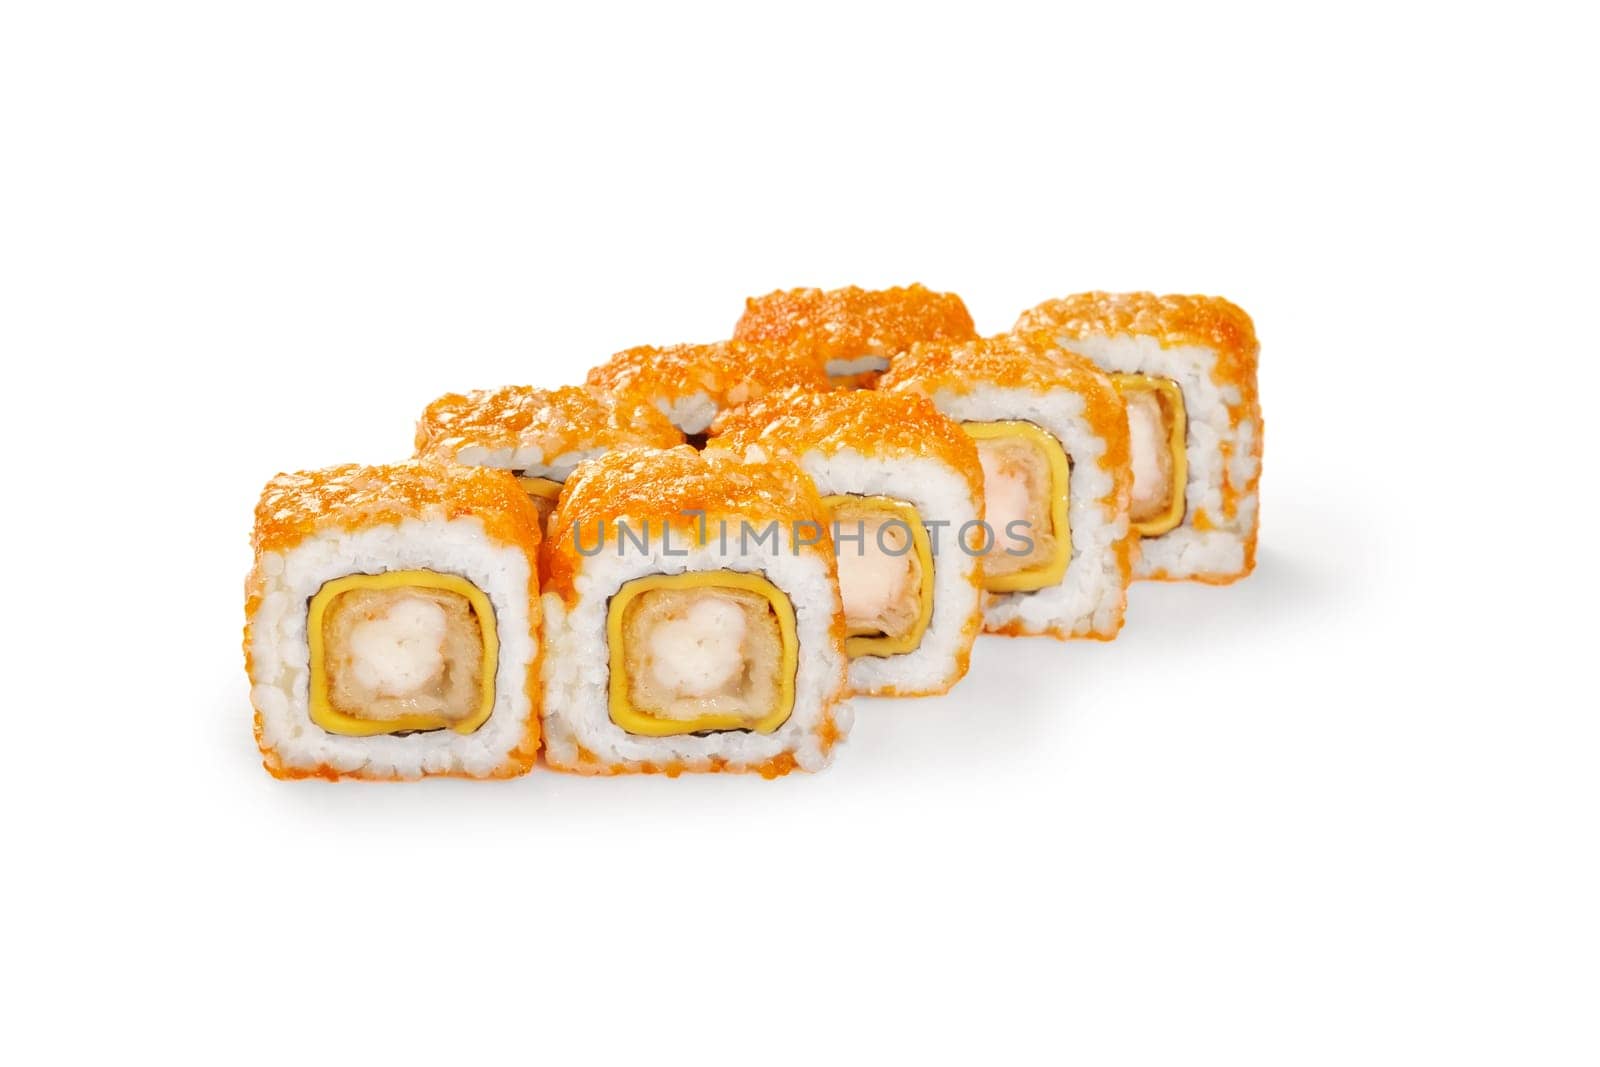 Appetizing sushi rolls coated with tobiko roe, with filling of tempura shrimp and cheddar cheese, displayed isolated on white. Japanese style cuisine